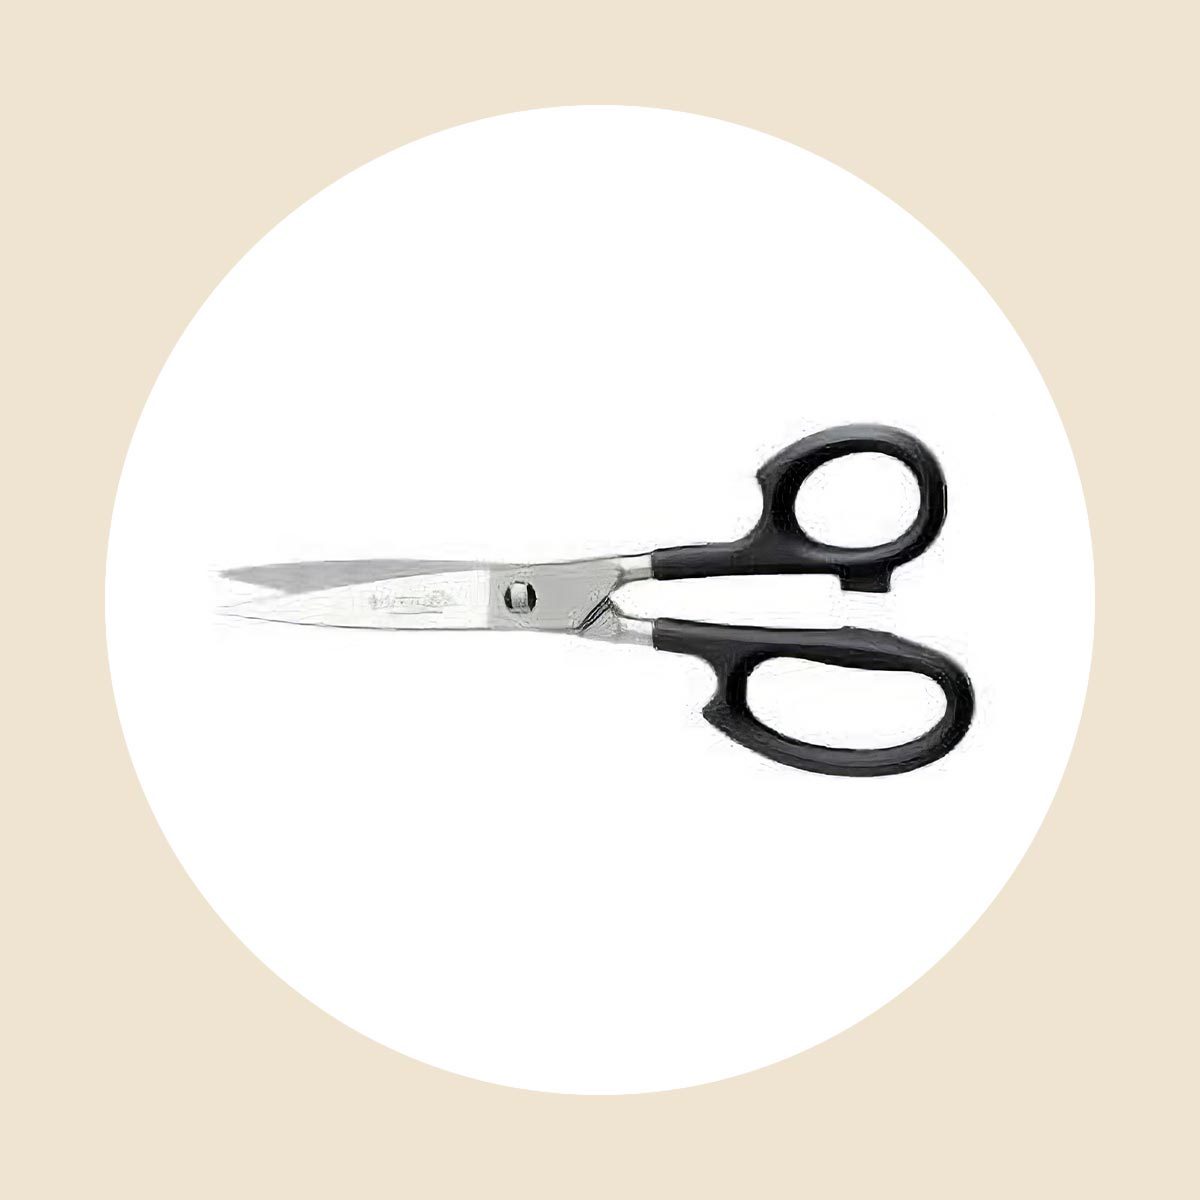 A Pair of Scissors With Black Handles